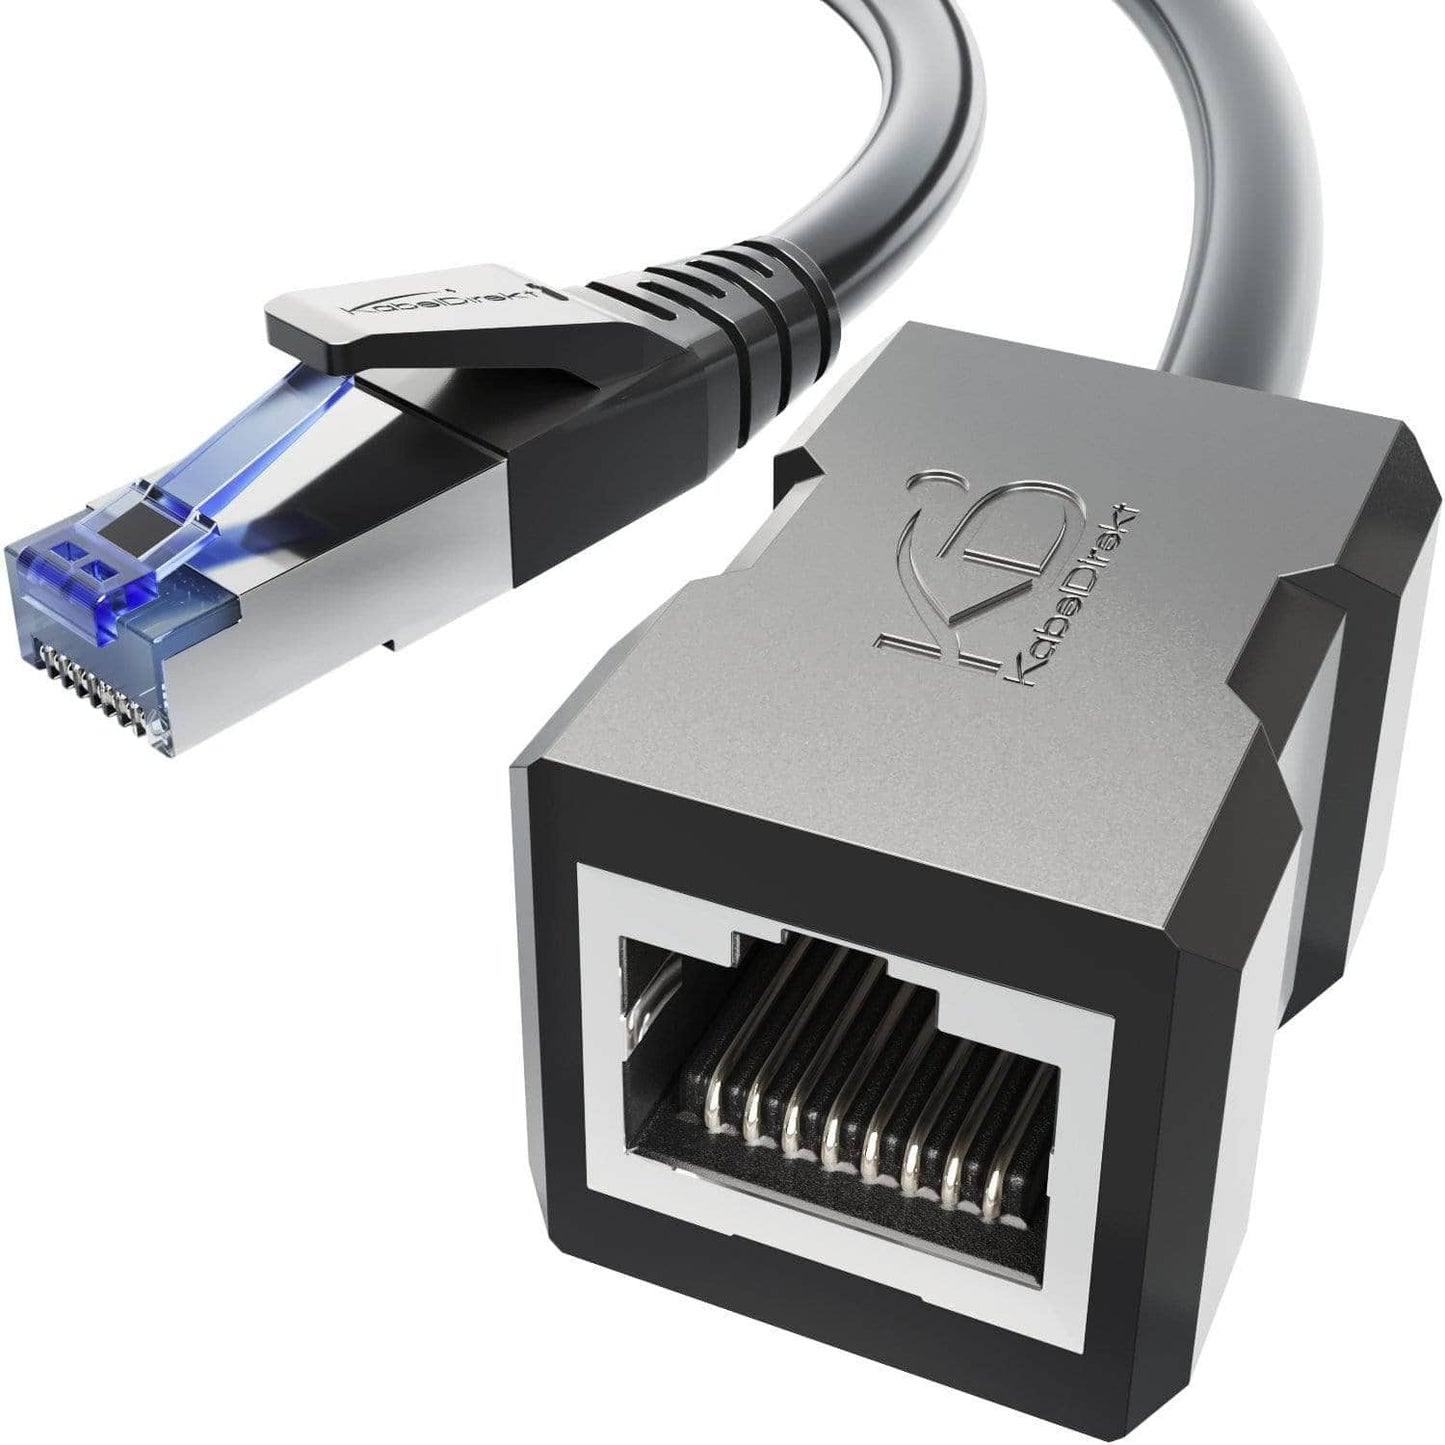 Cat 7 Ethernet extension - 10Gbit/s high speed network cable for high speed data connections